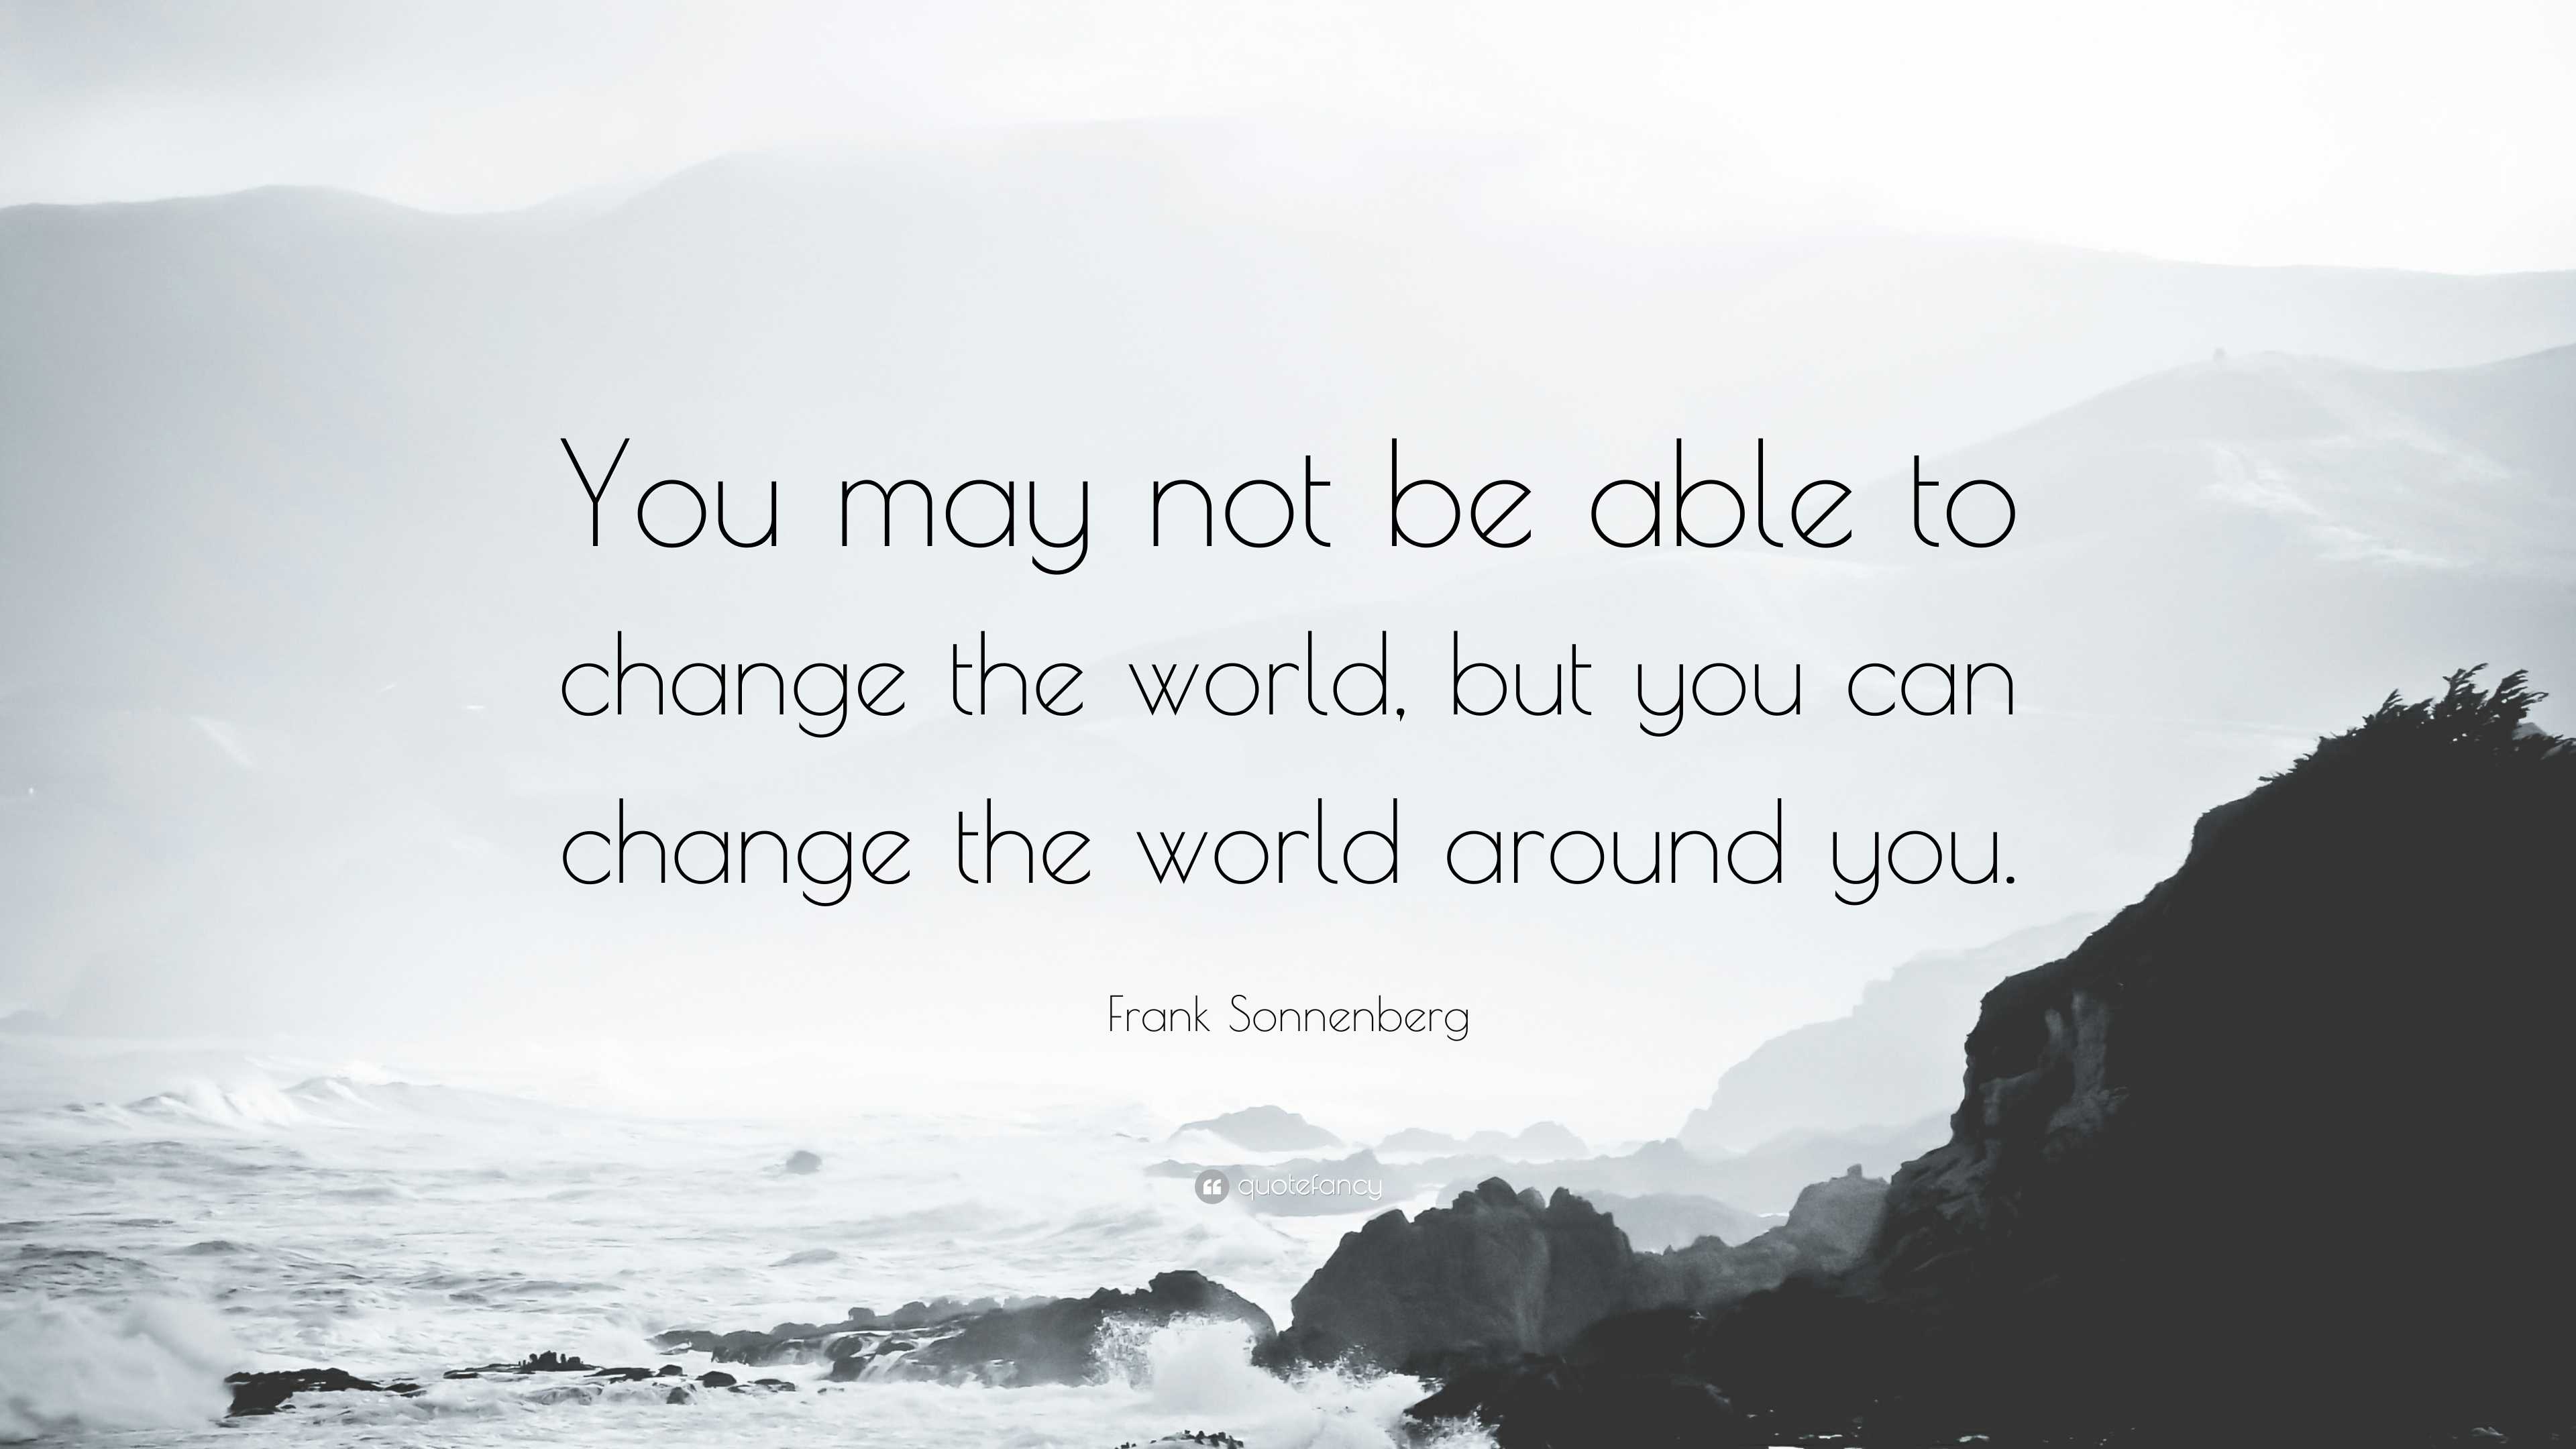 Frank Sonnenberg Quote: “You may not be able to change the world, but ...